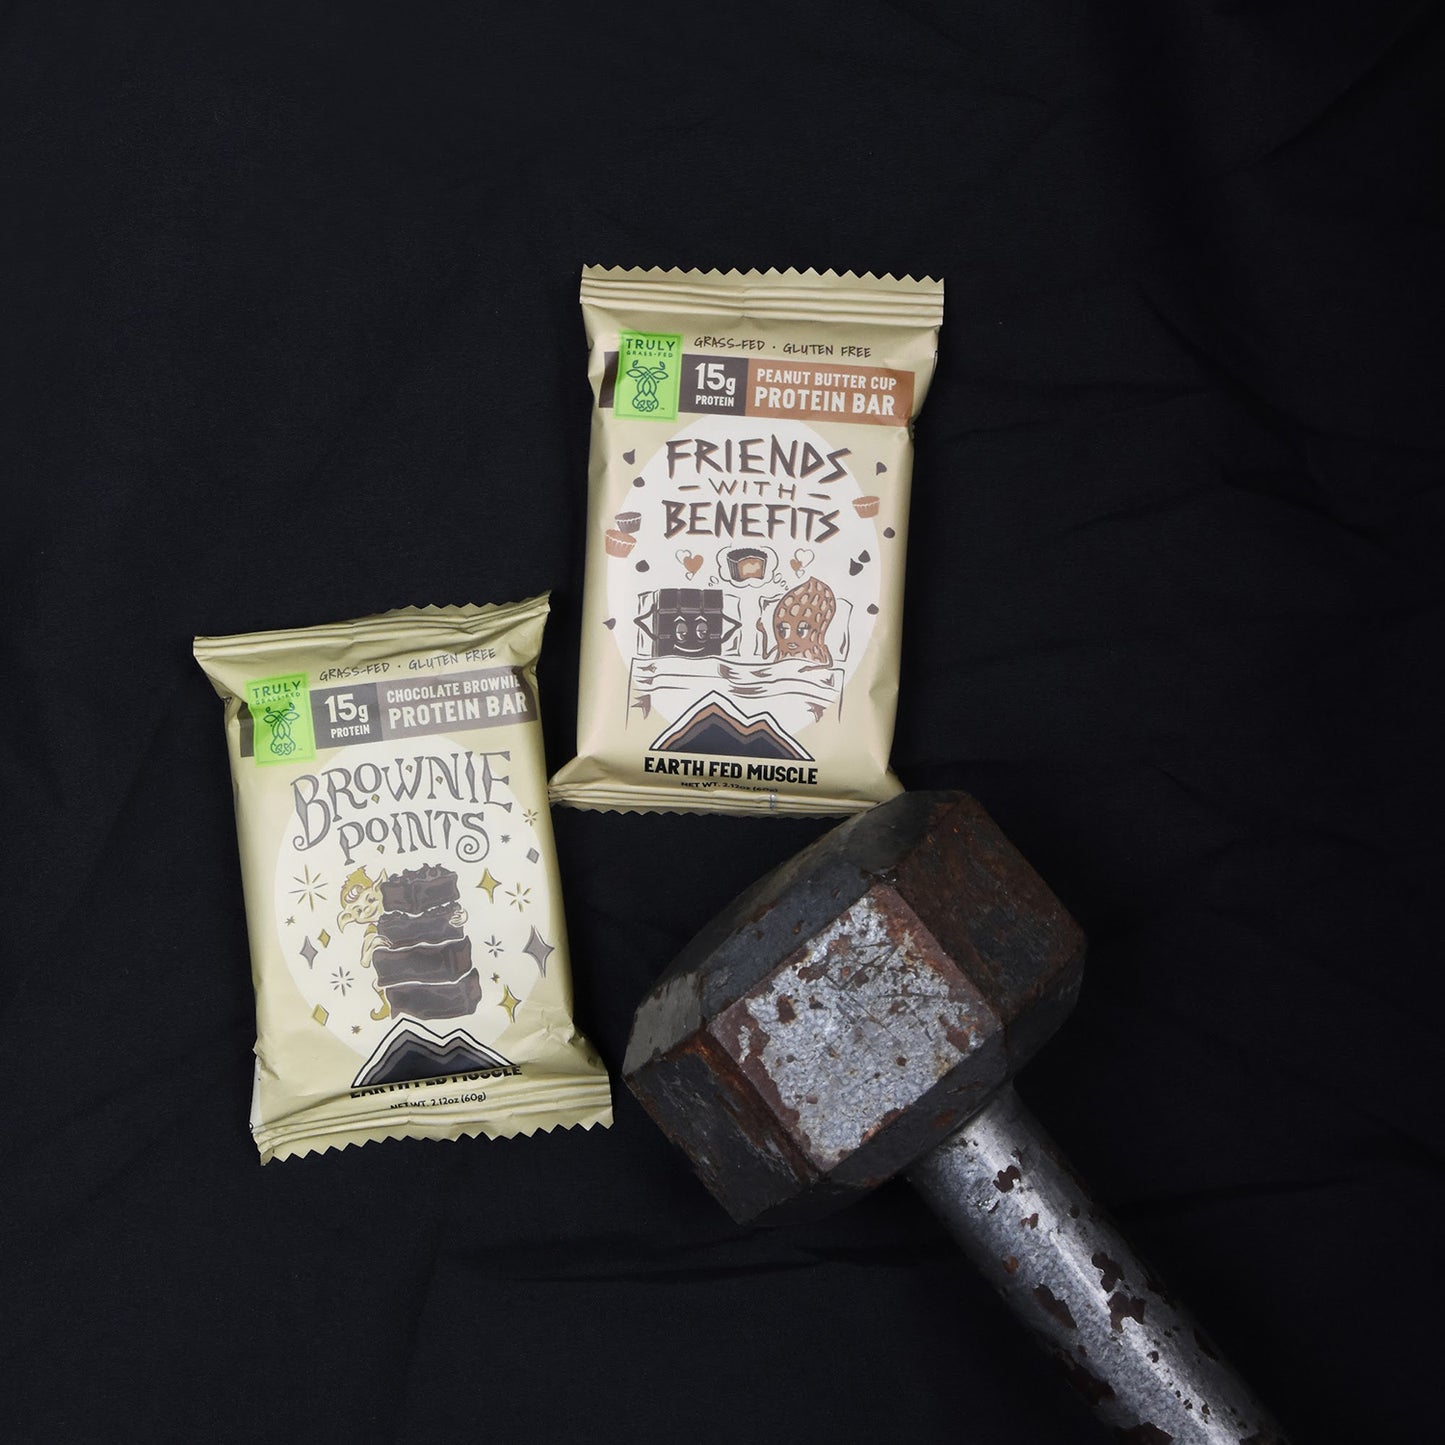 Chocolate Brownie Grass Fed Whey Protein Bars